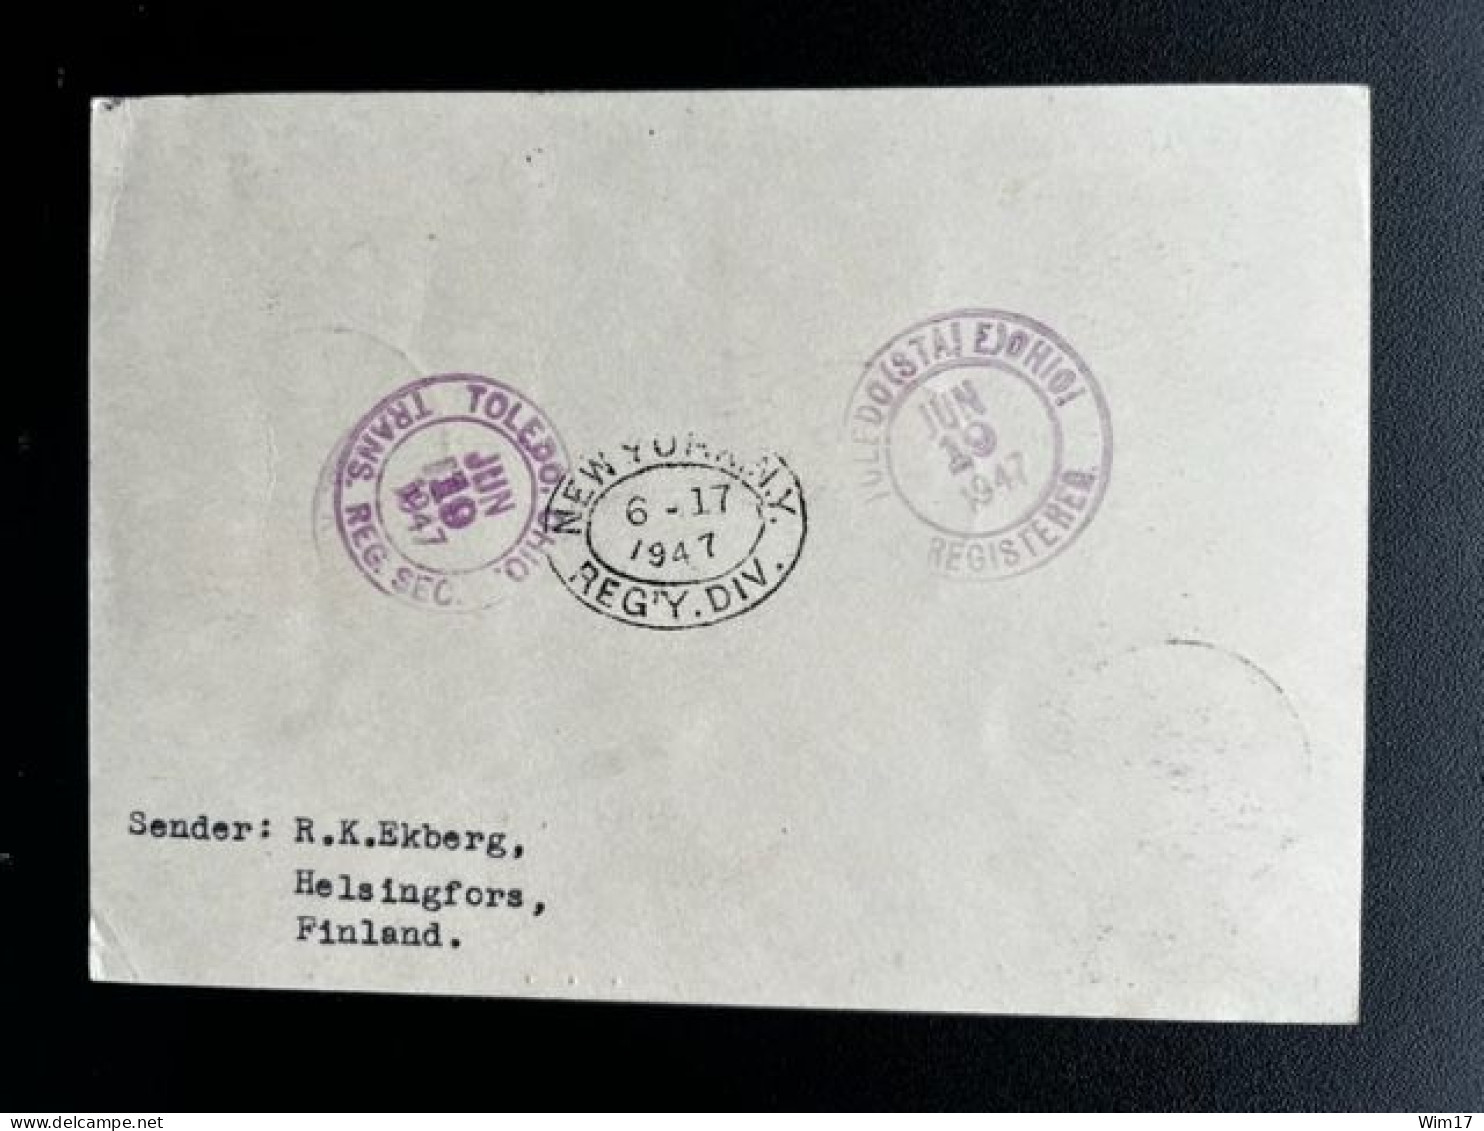 FINLAND SUOMI 1947 REGISTERED POSTCARD HELSINKI HELSINGFORS TO TOLEDO USA 02-06-1947 WITH FIRST DAY CANCEL HORSES - Briefe U. Dokumente